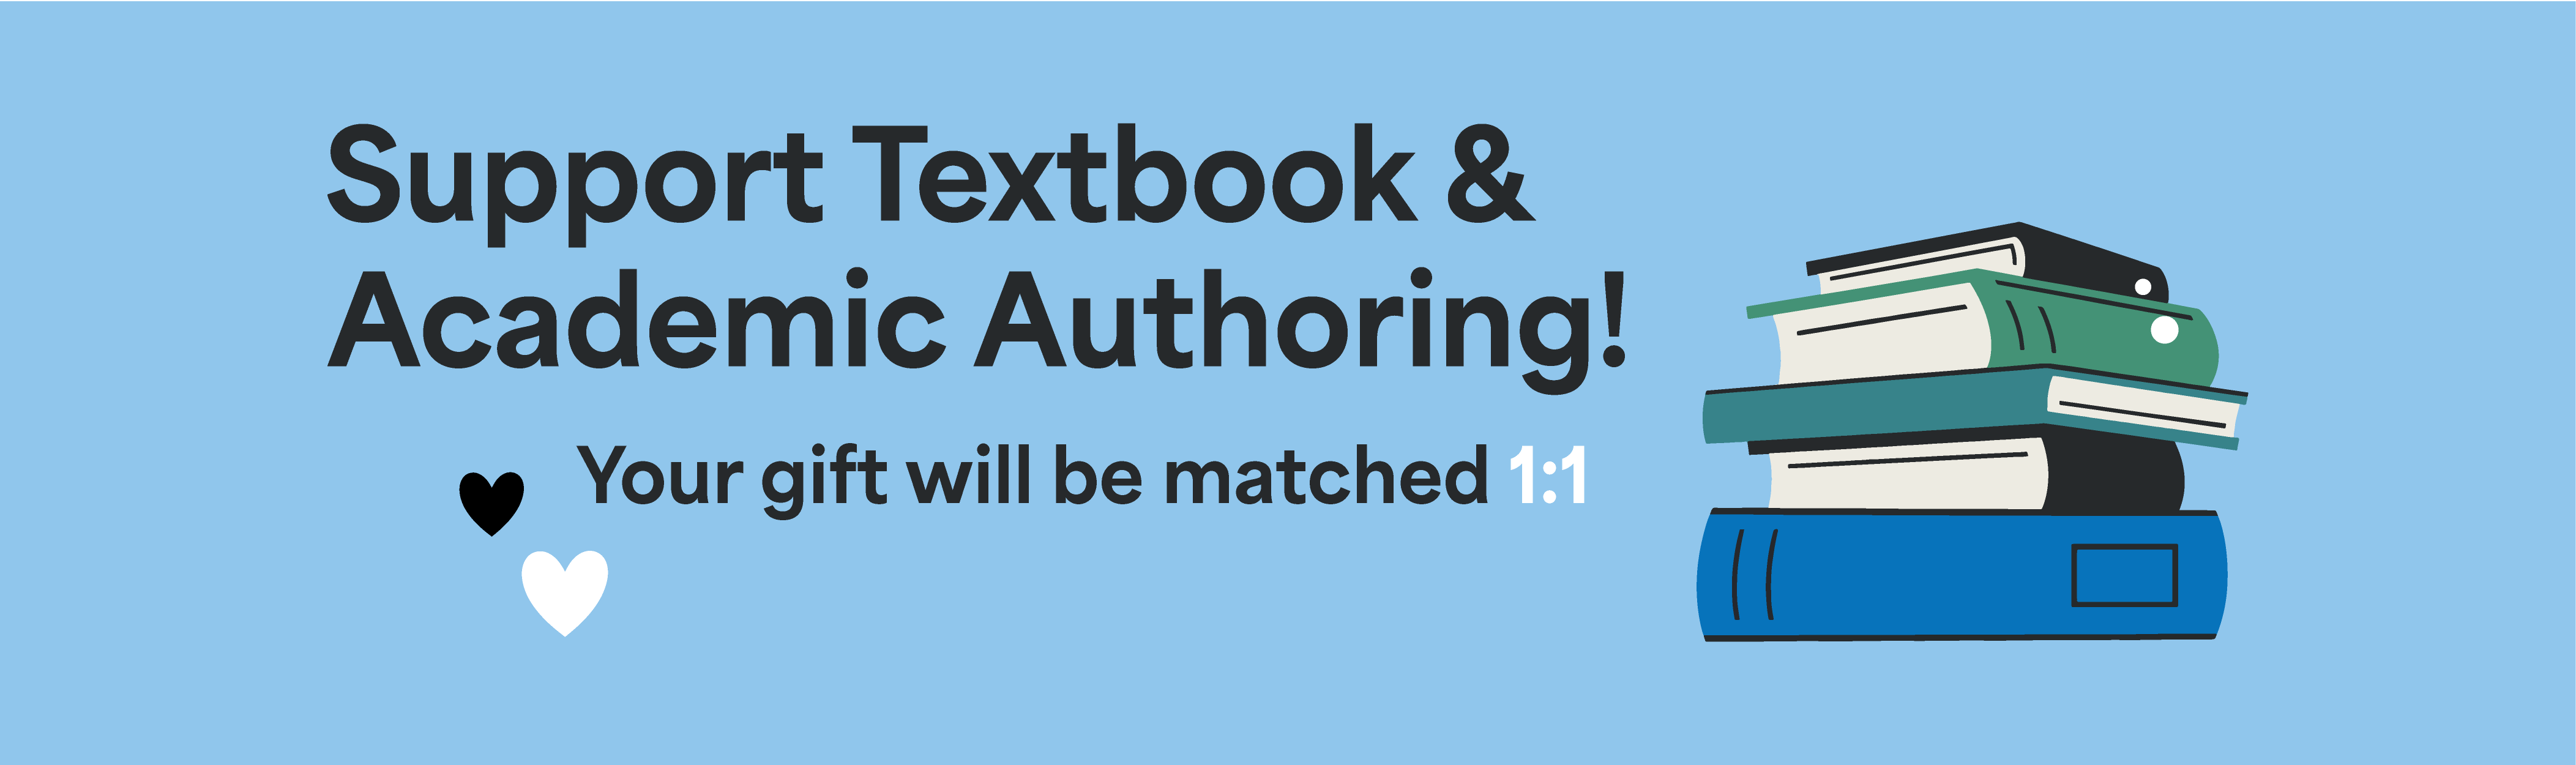 Support Textbook & Academic Authoring